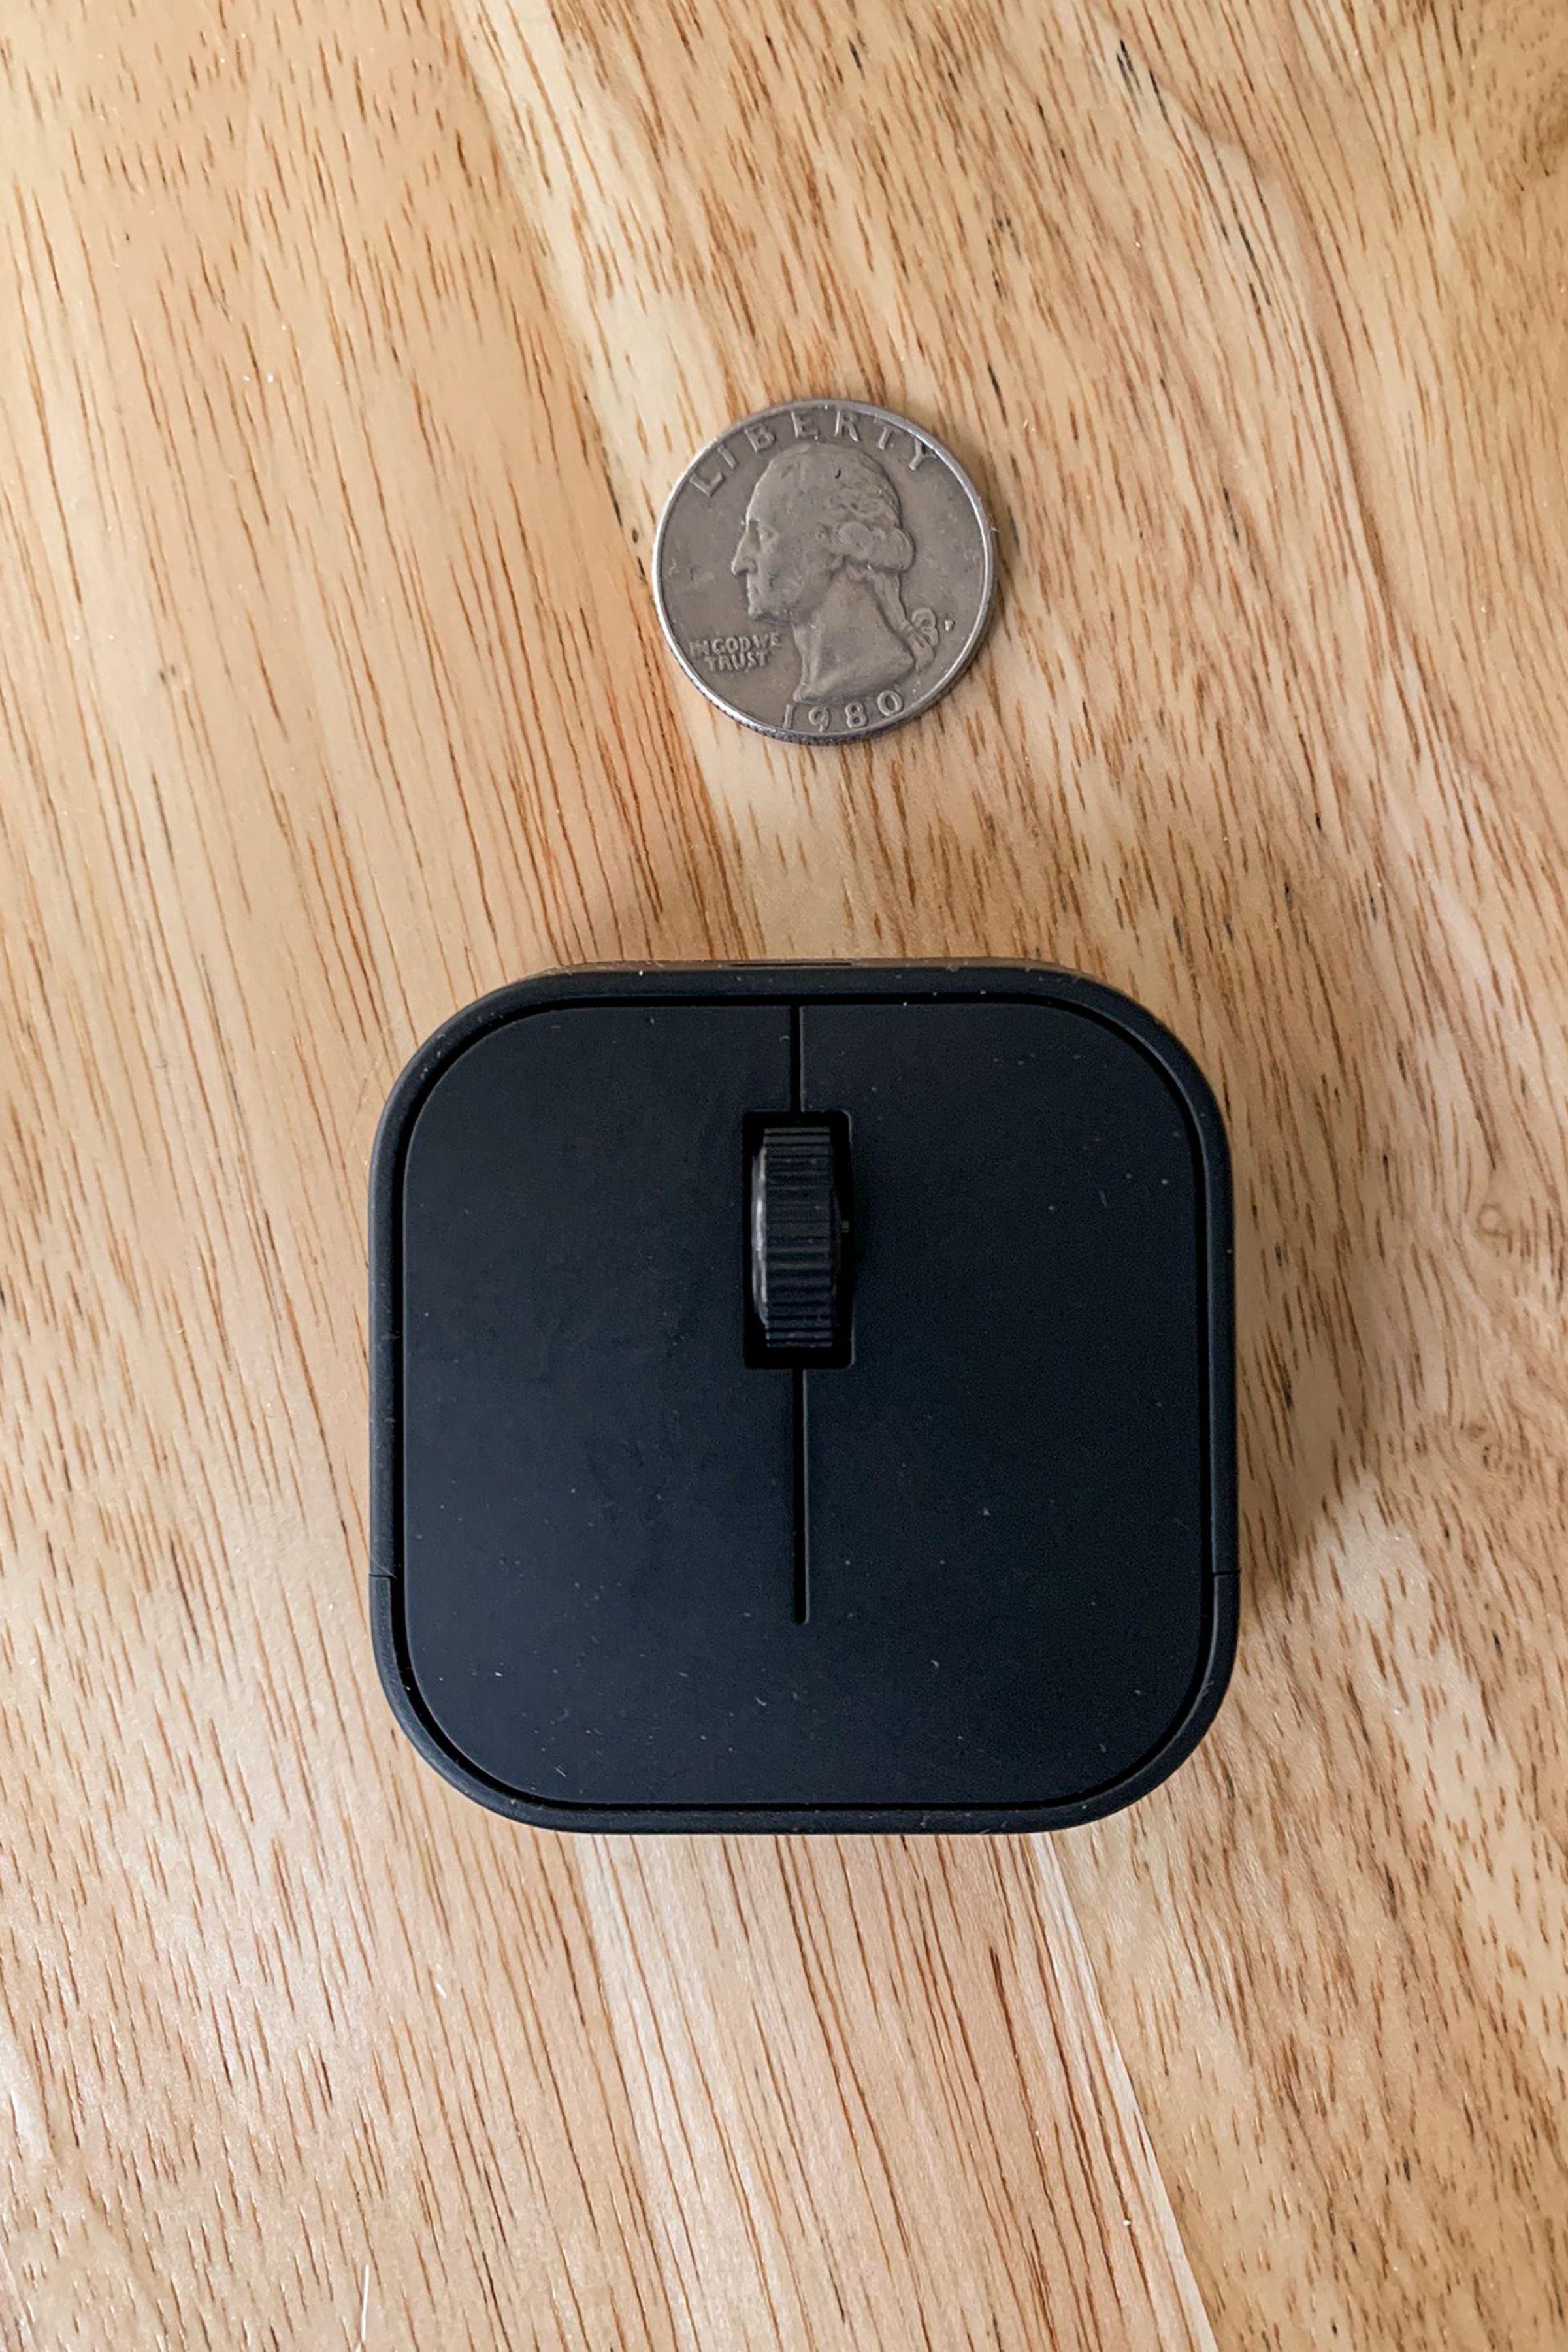 Small square mouse with buttons and scroll wheel.